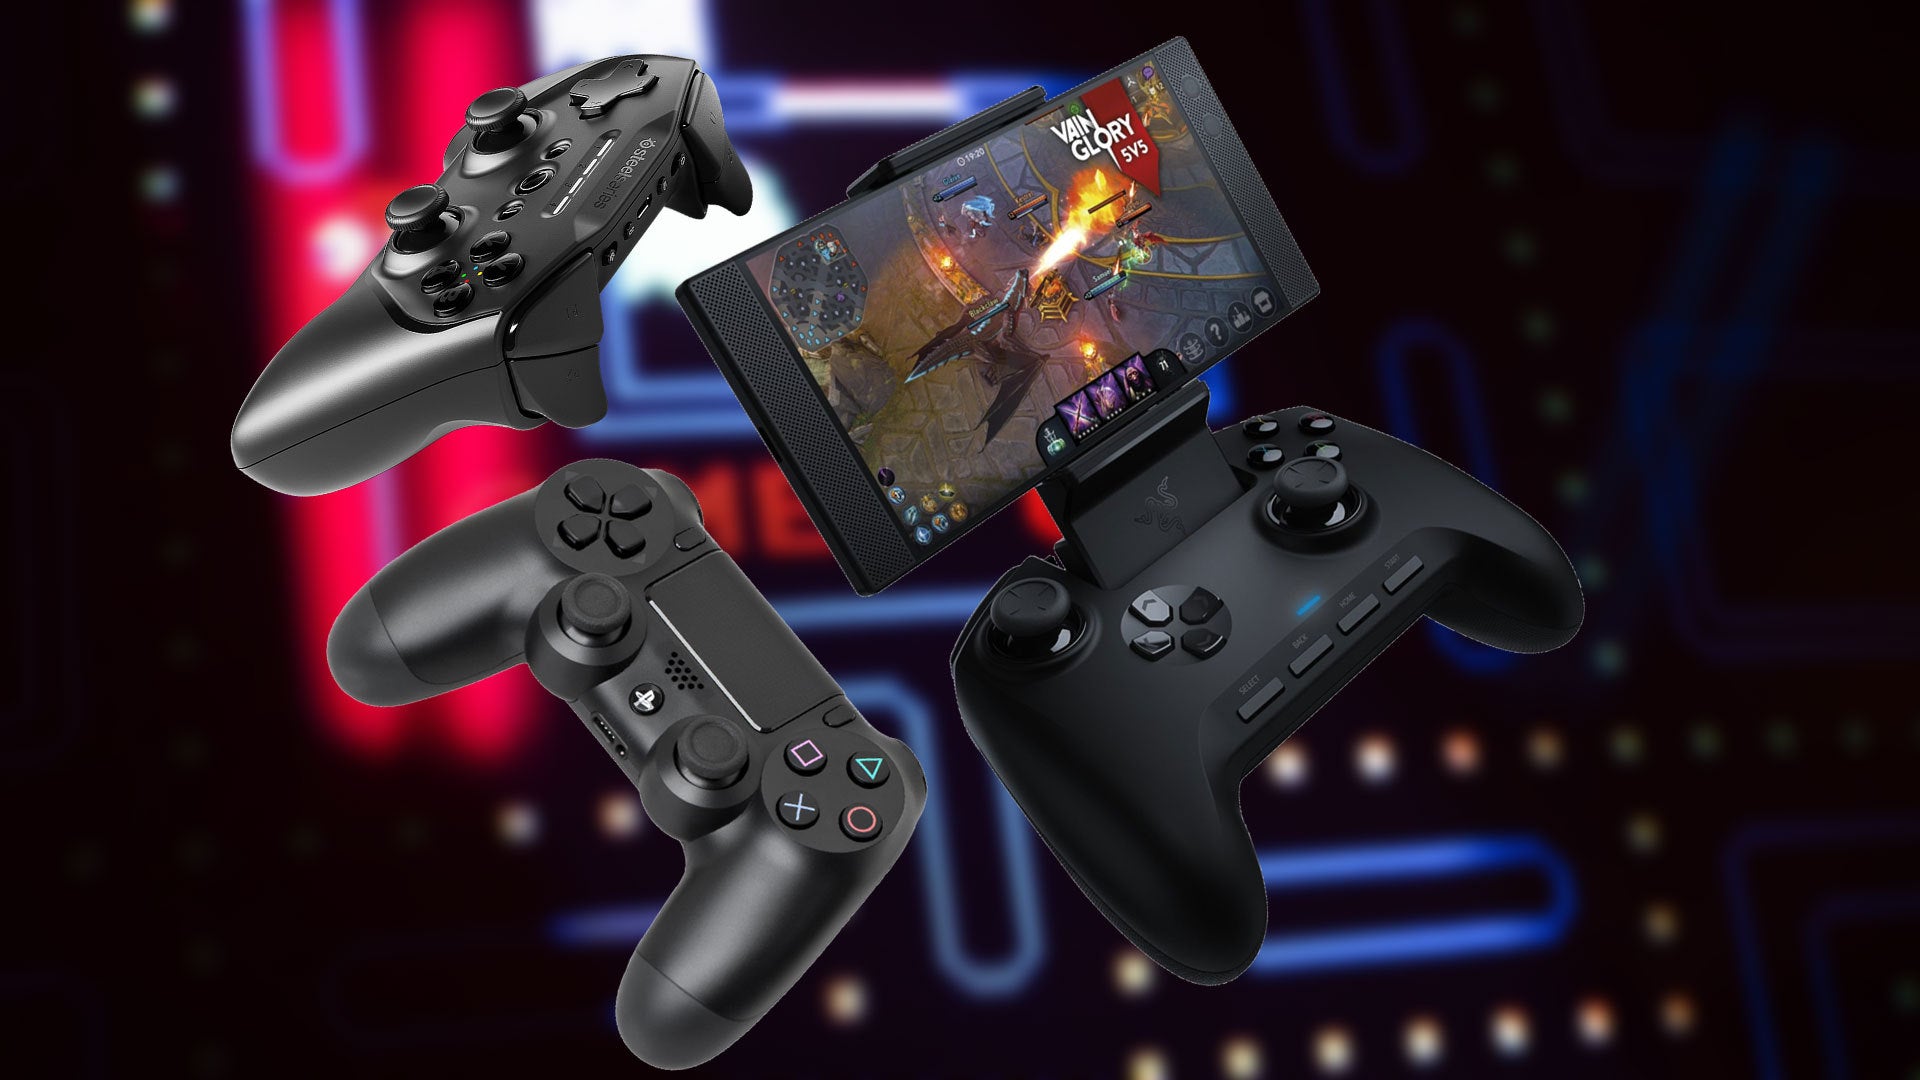 Desire Your Mobile Gaming to the Next Level With a Phone Controller